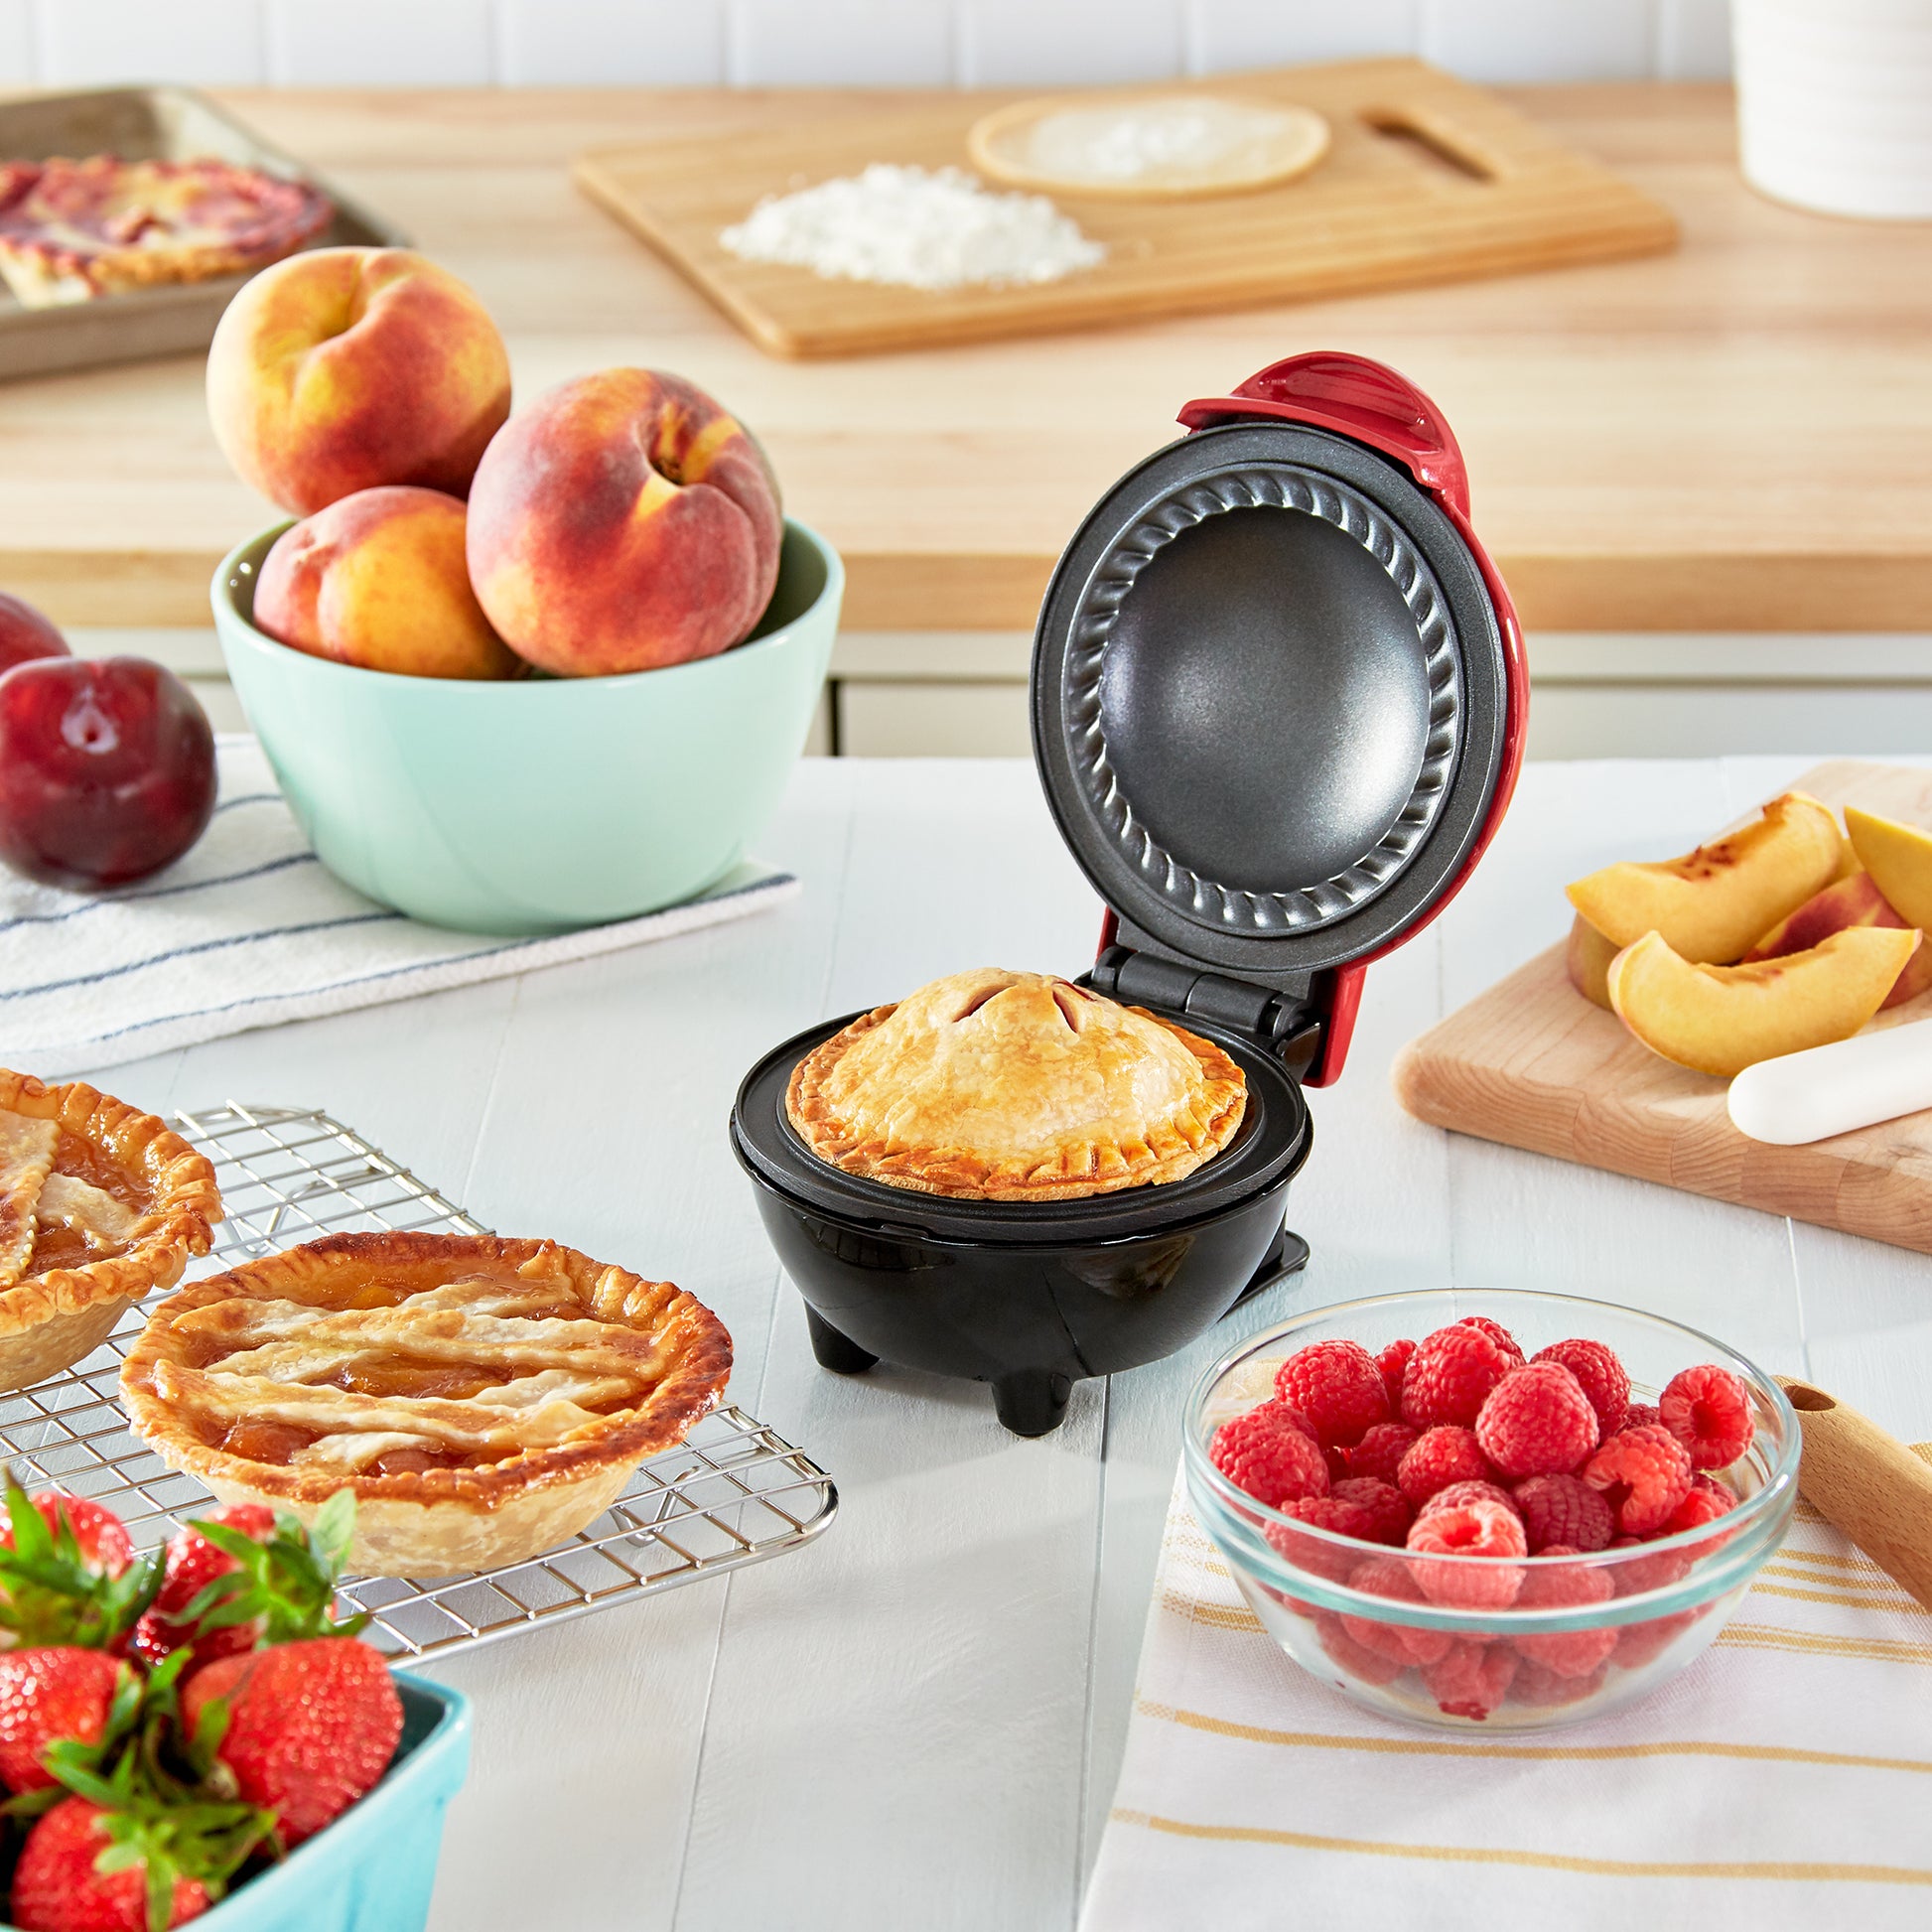 Breville Mini Pie Maker User Experience: #Food - Finding Our Way Now